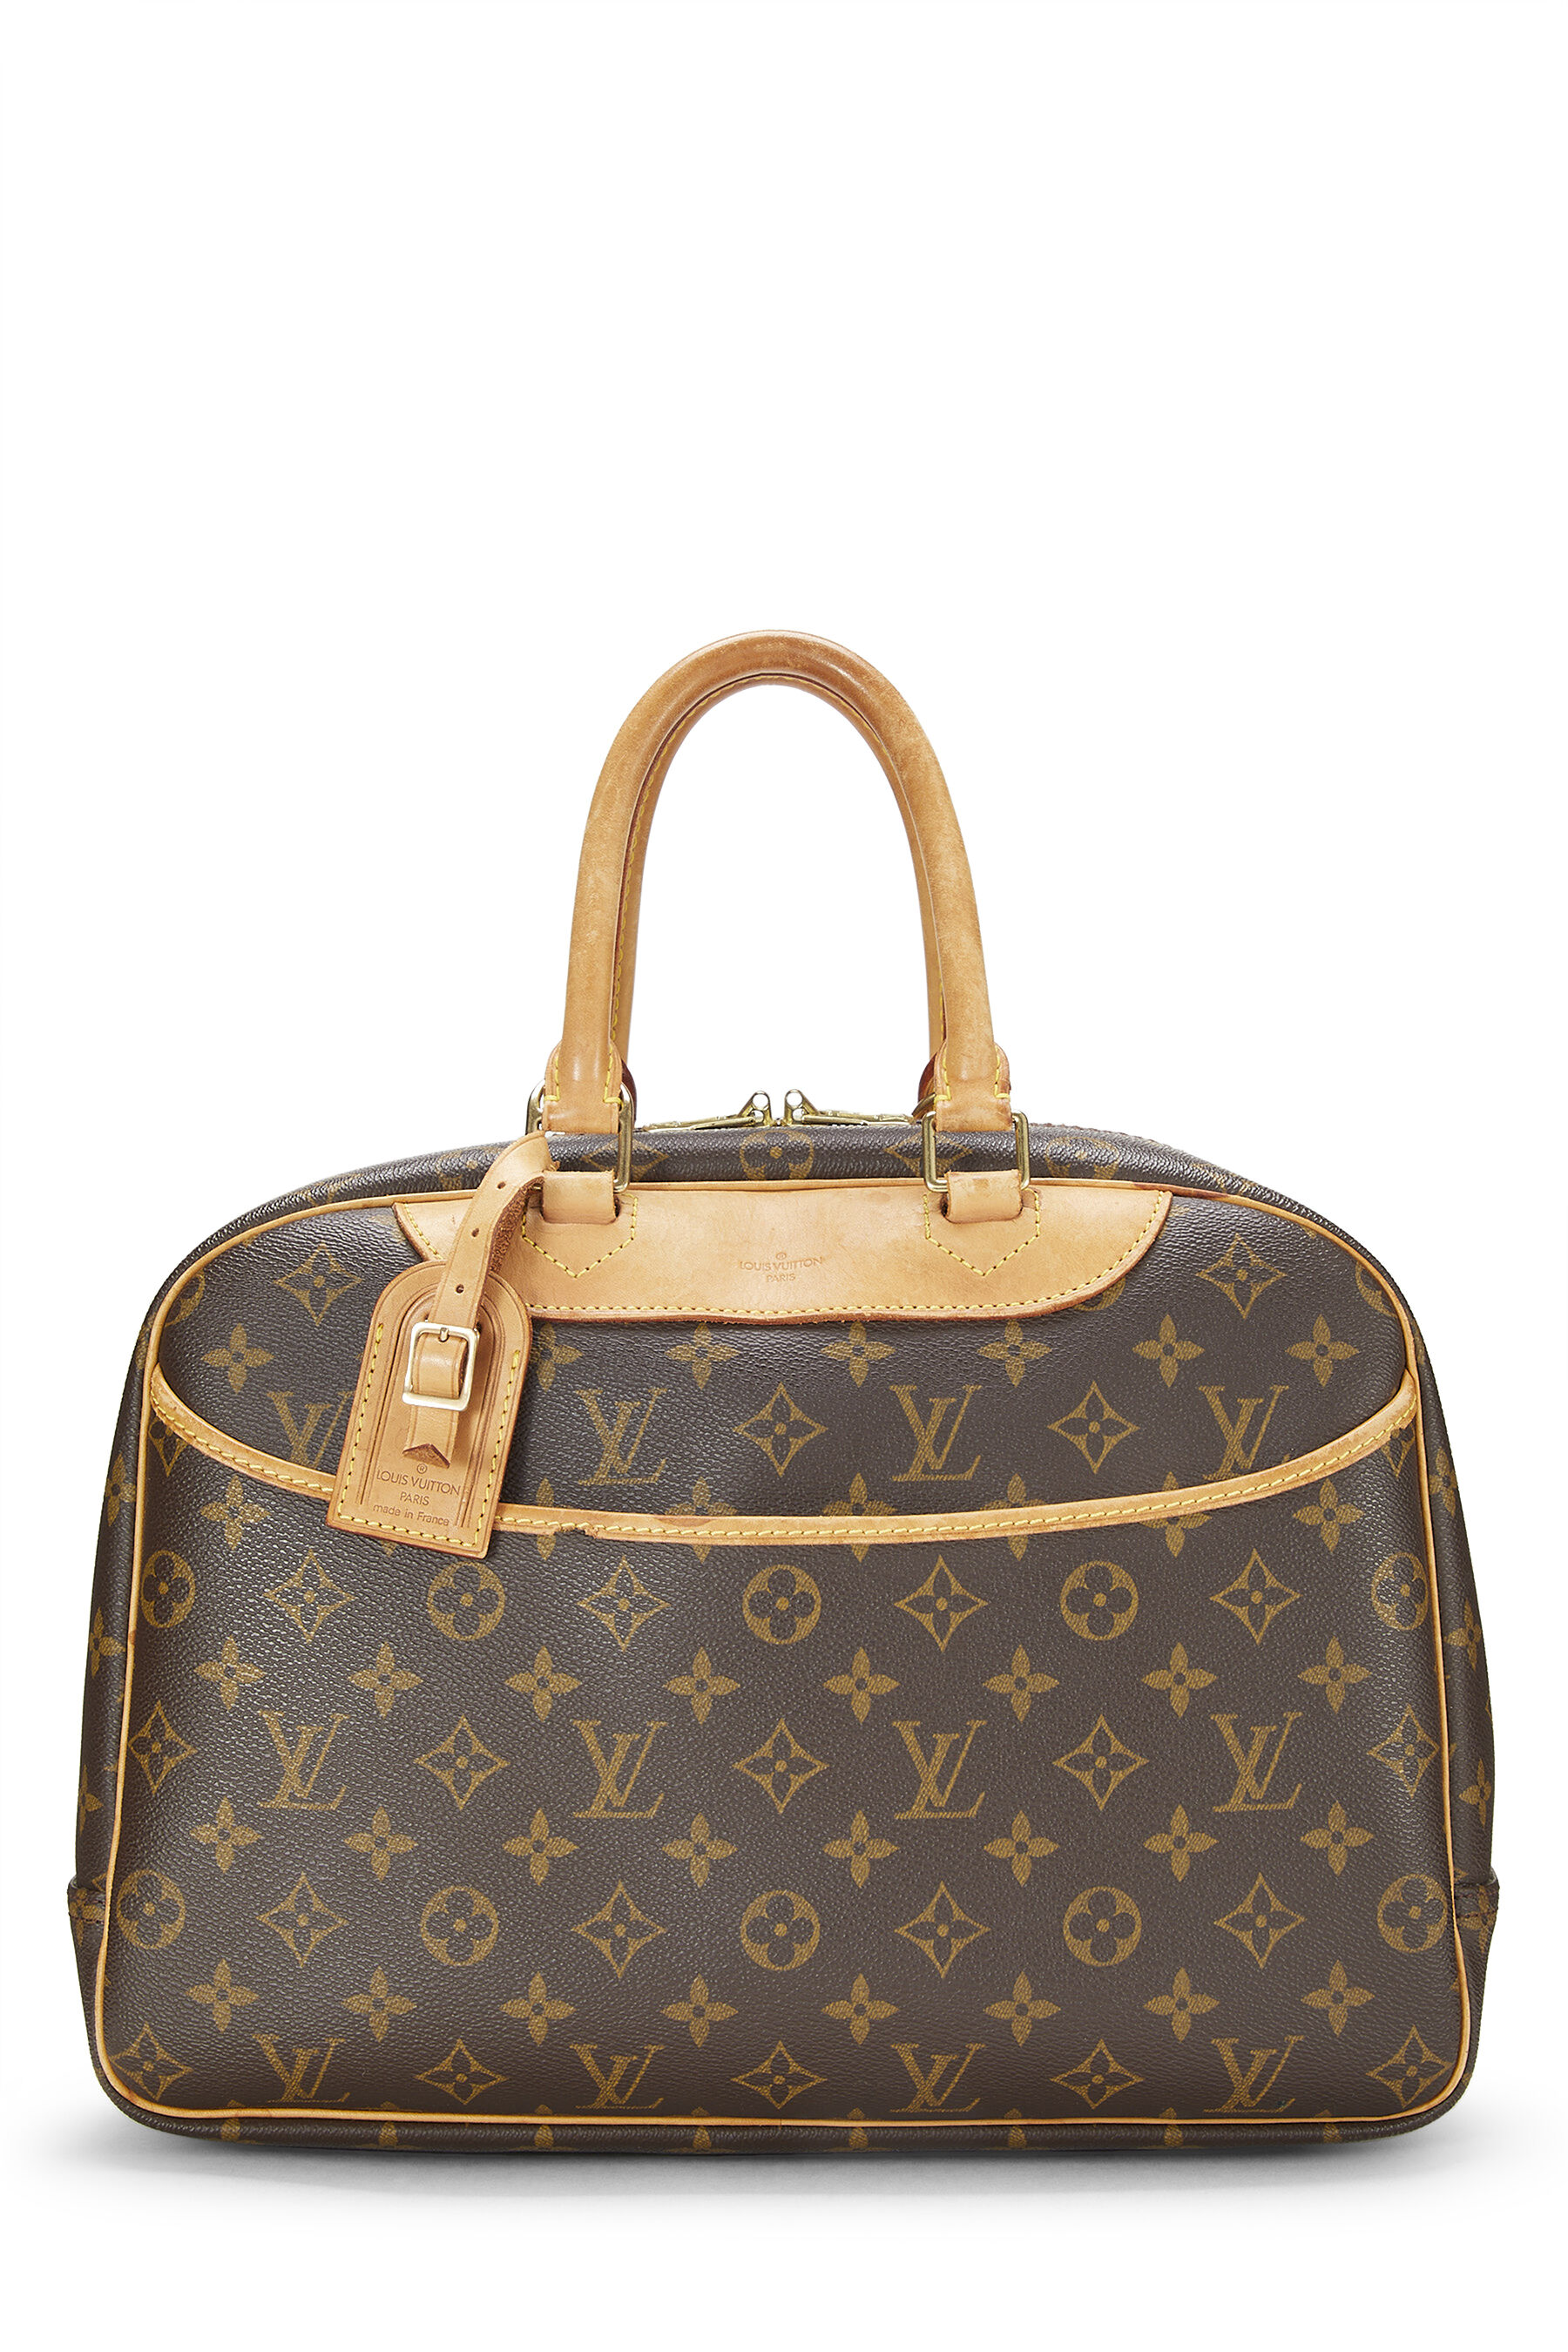 Louis Vuitton Deauville Bag Reference Guide - Spotted Fashion